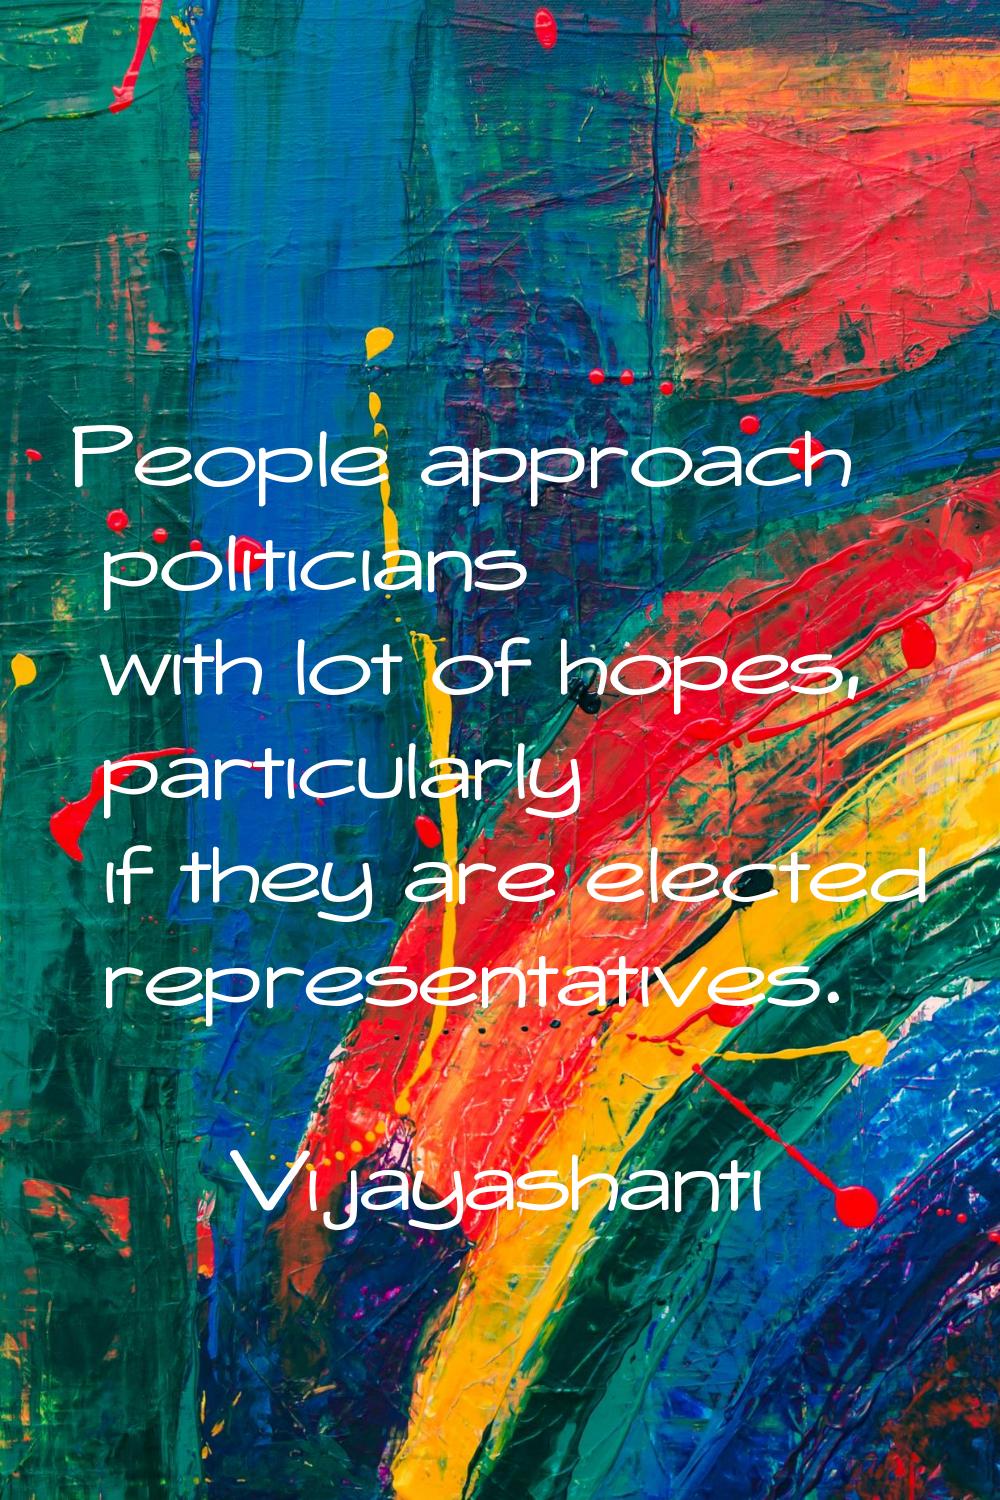 People approach politicians with lot of hopes, particularly if they are elected representatives.